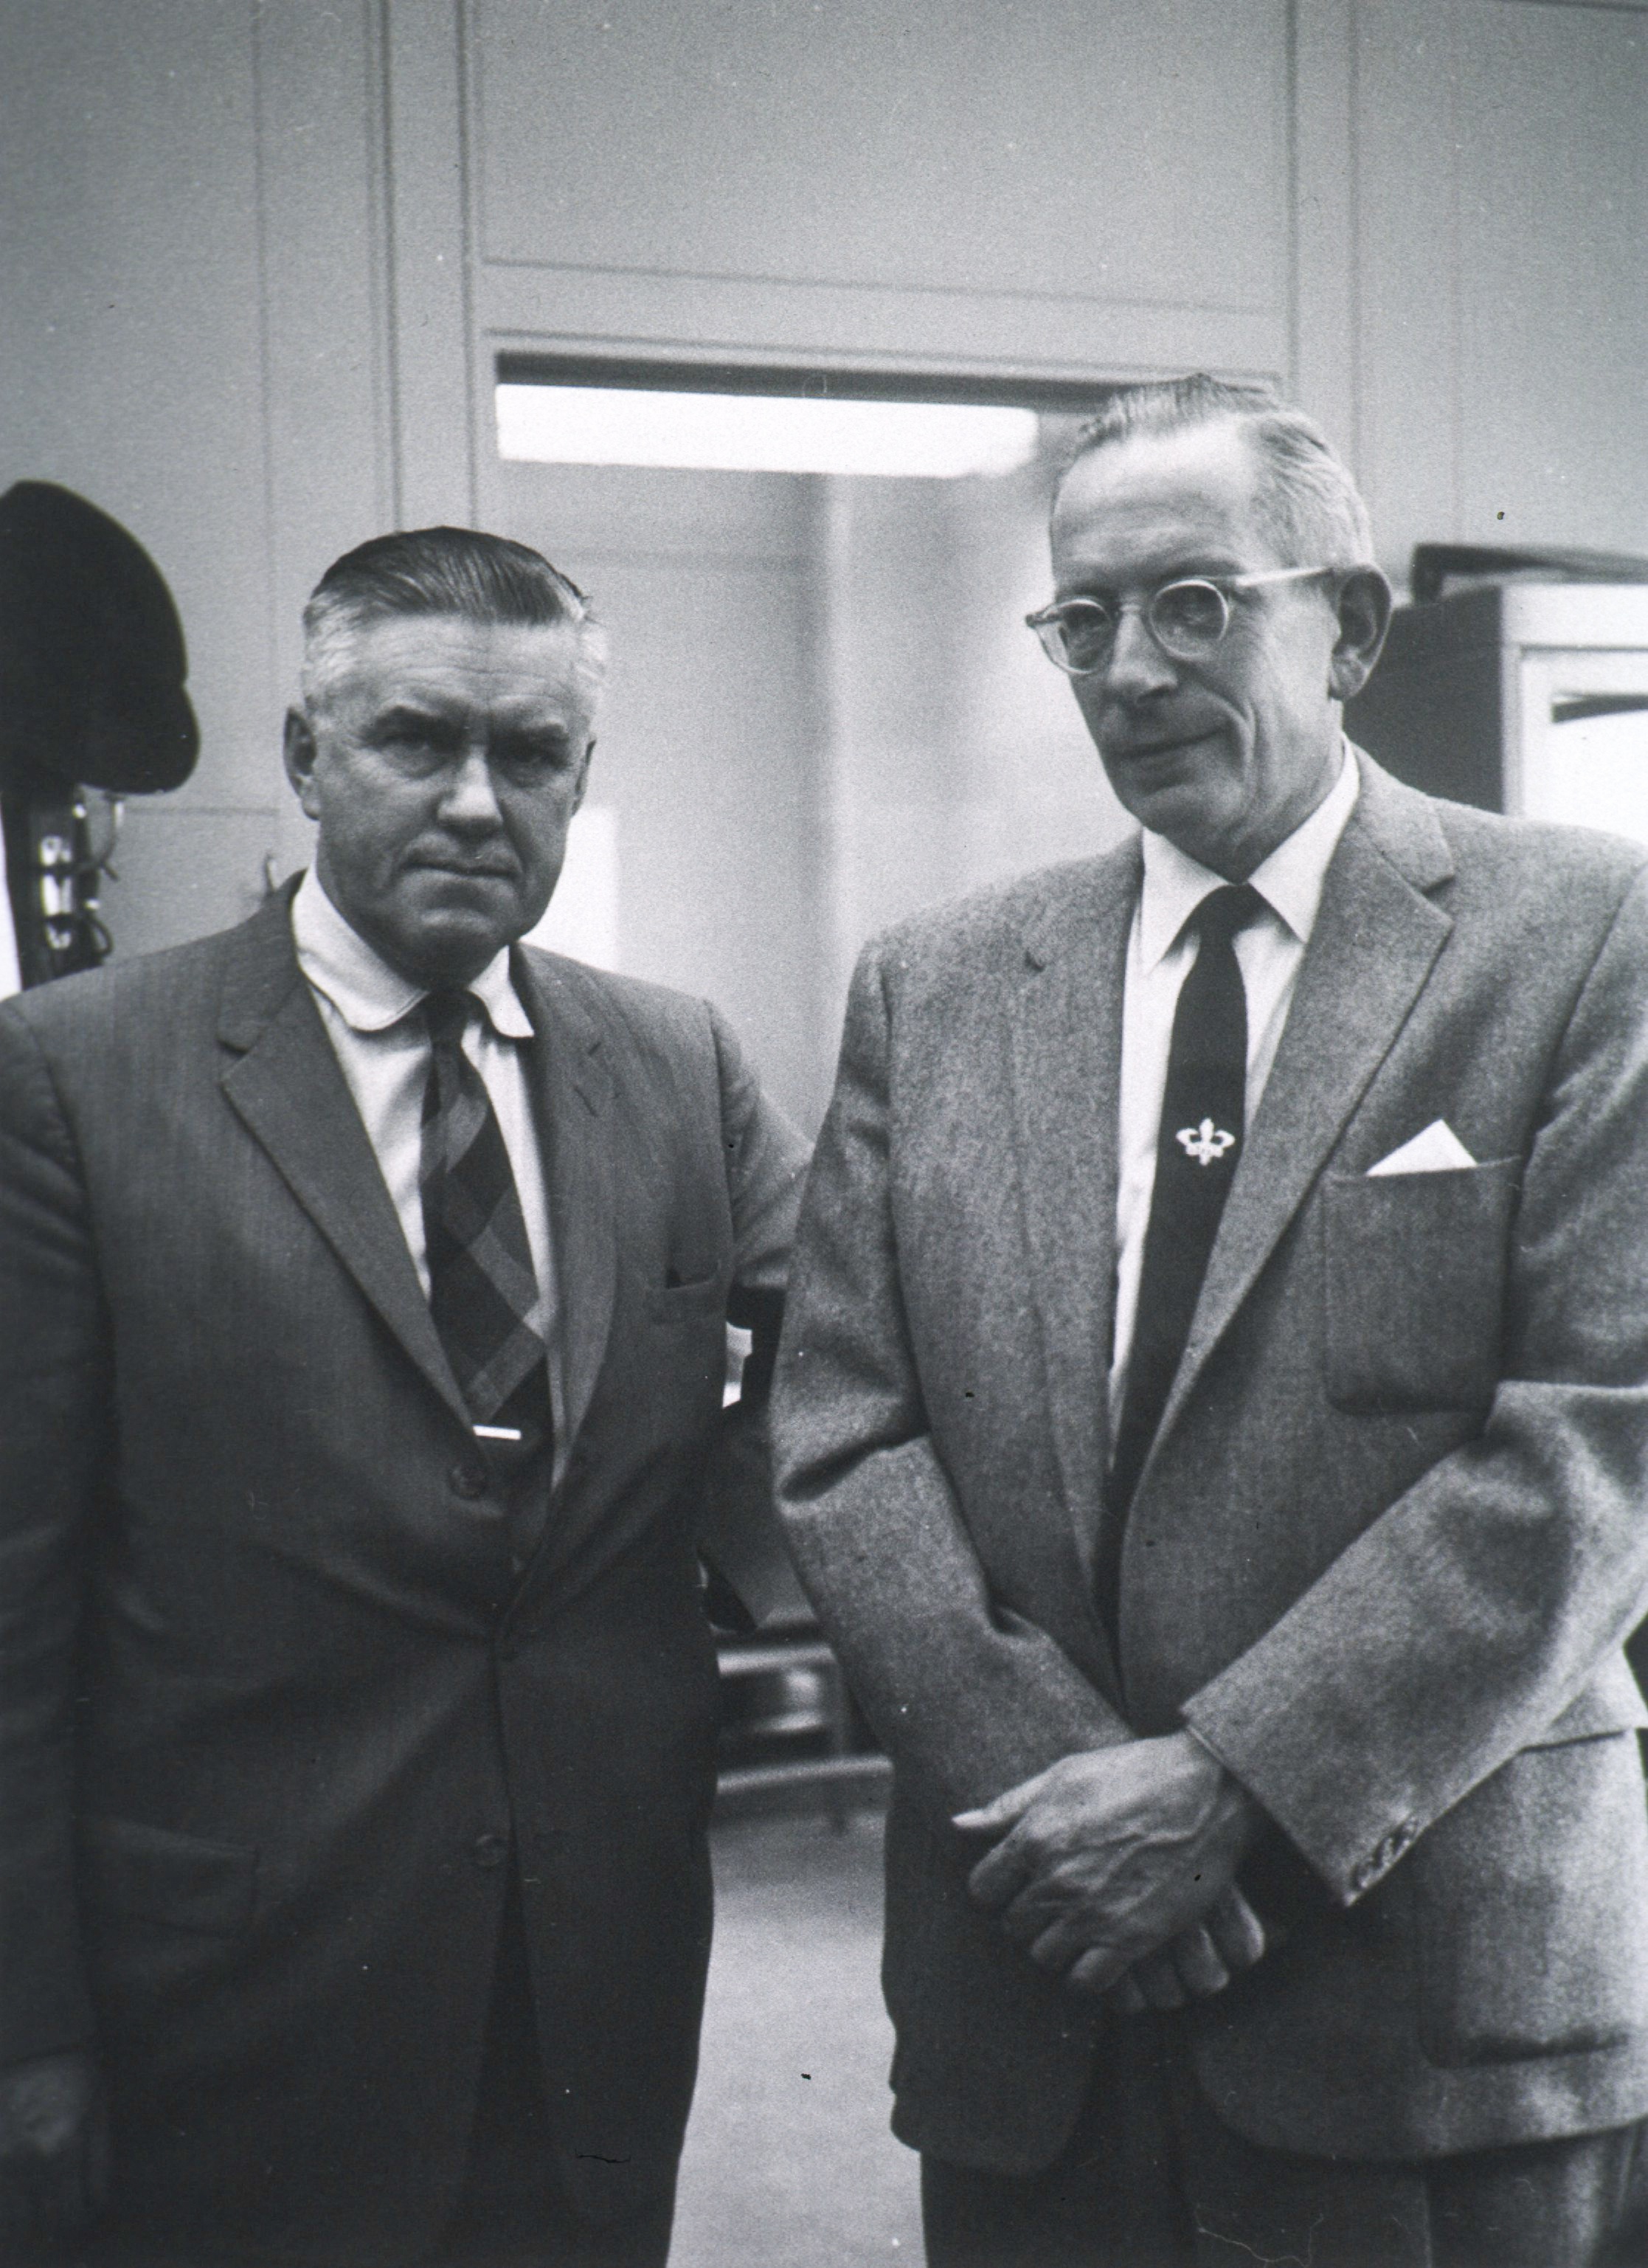 two older men in suits, stand for their photo to be taken.